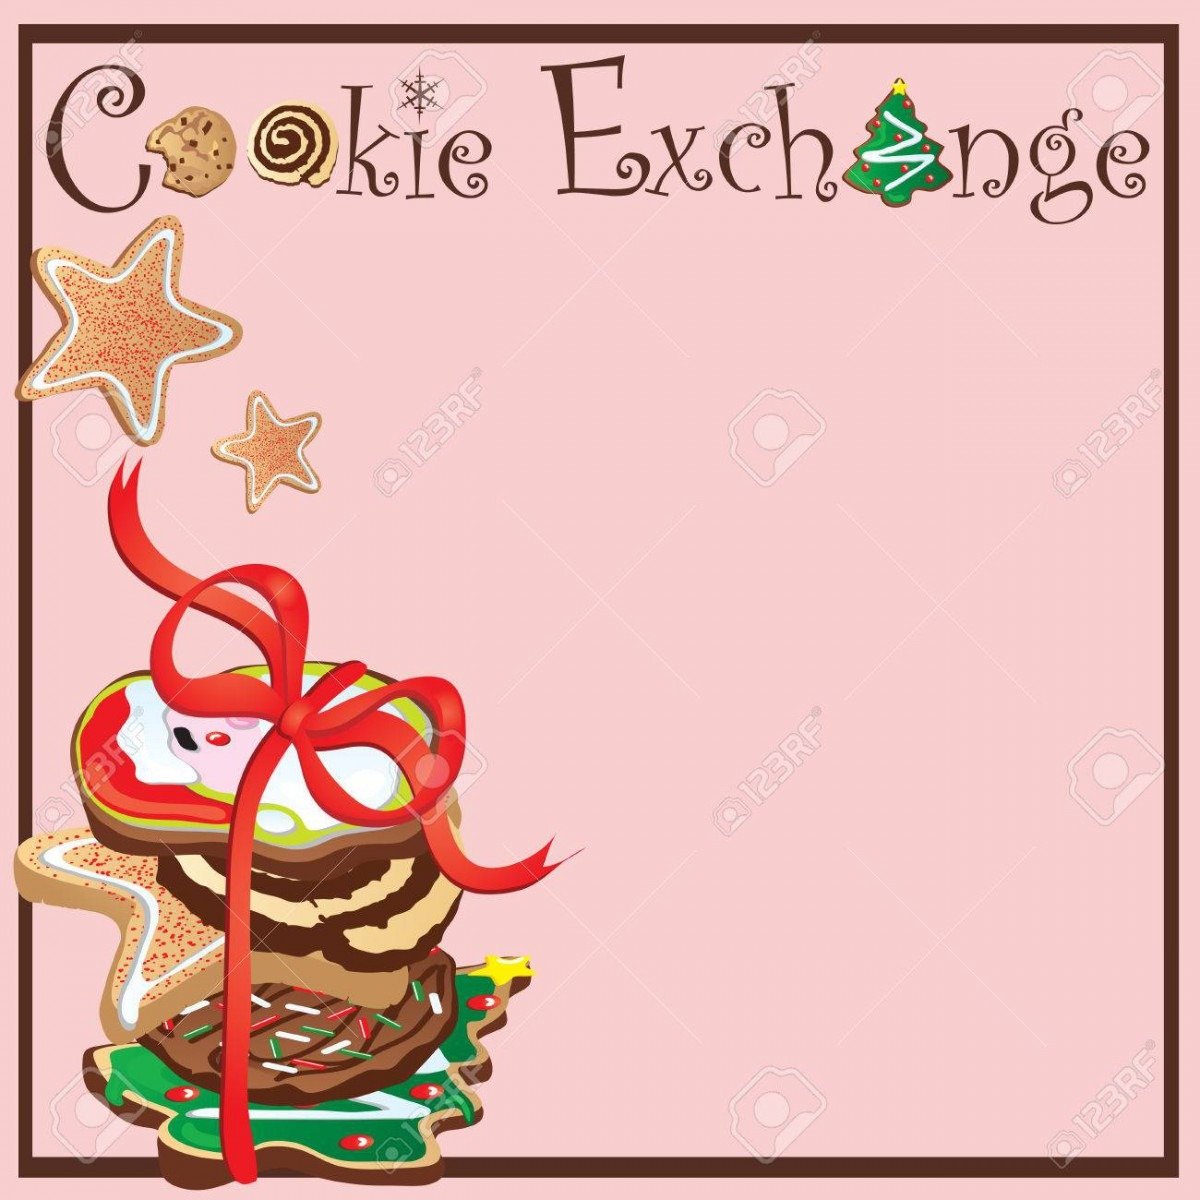 Invitation For A Cookie Exchange Party Royalty Free Cliparts